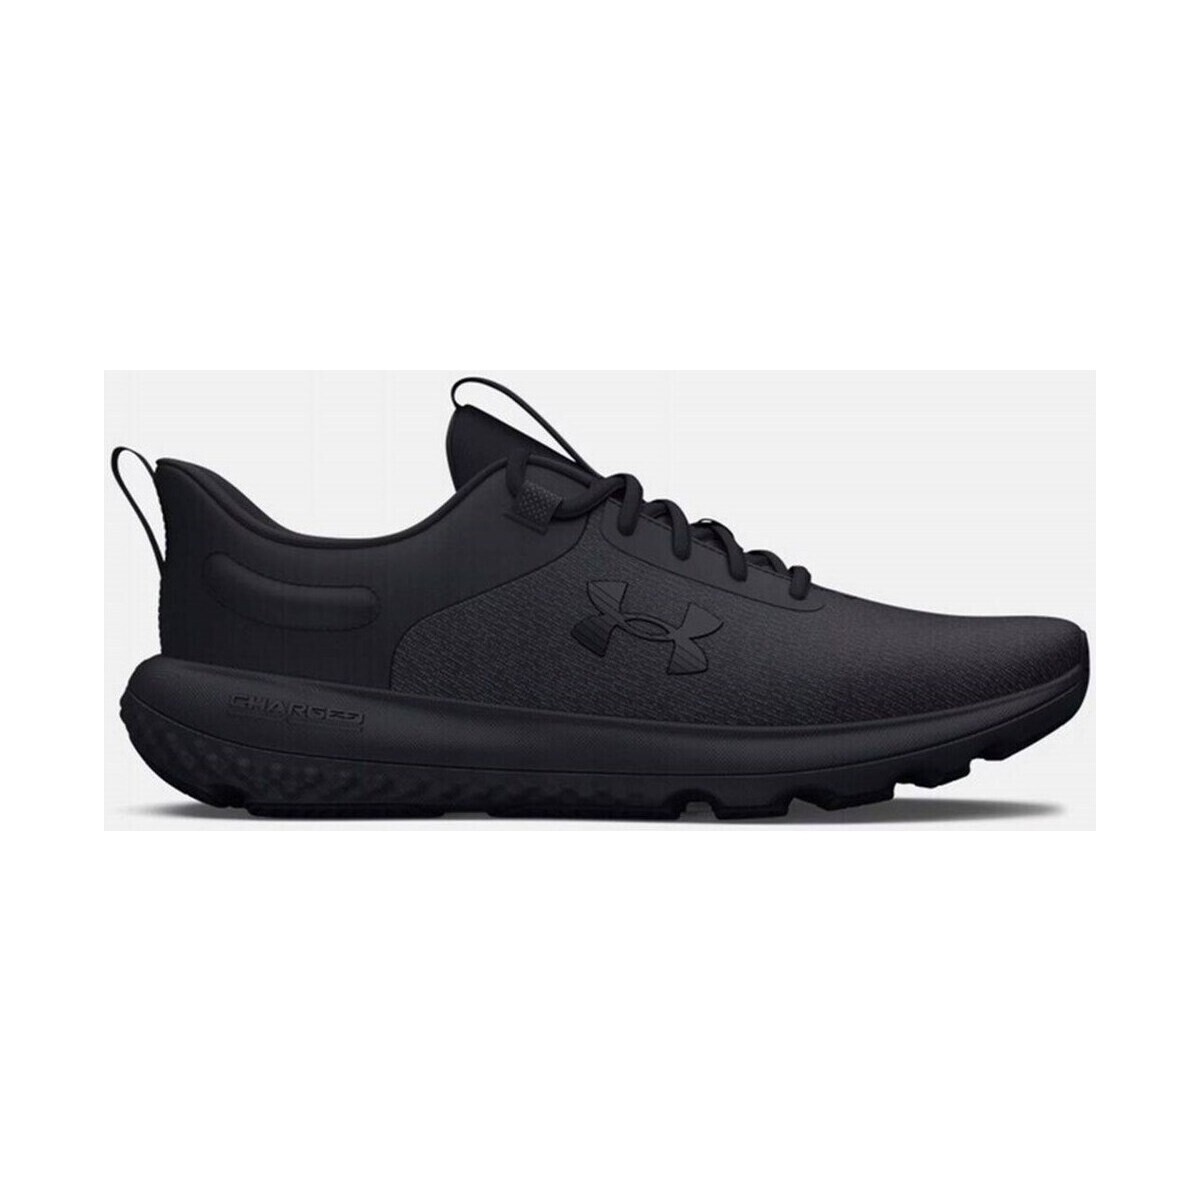 Under Armour Charged Revitalize Black